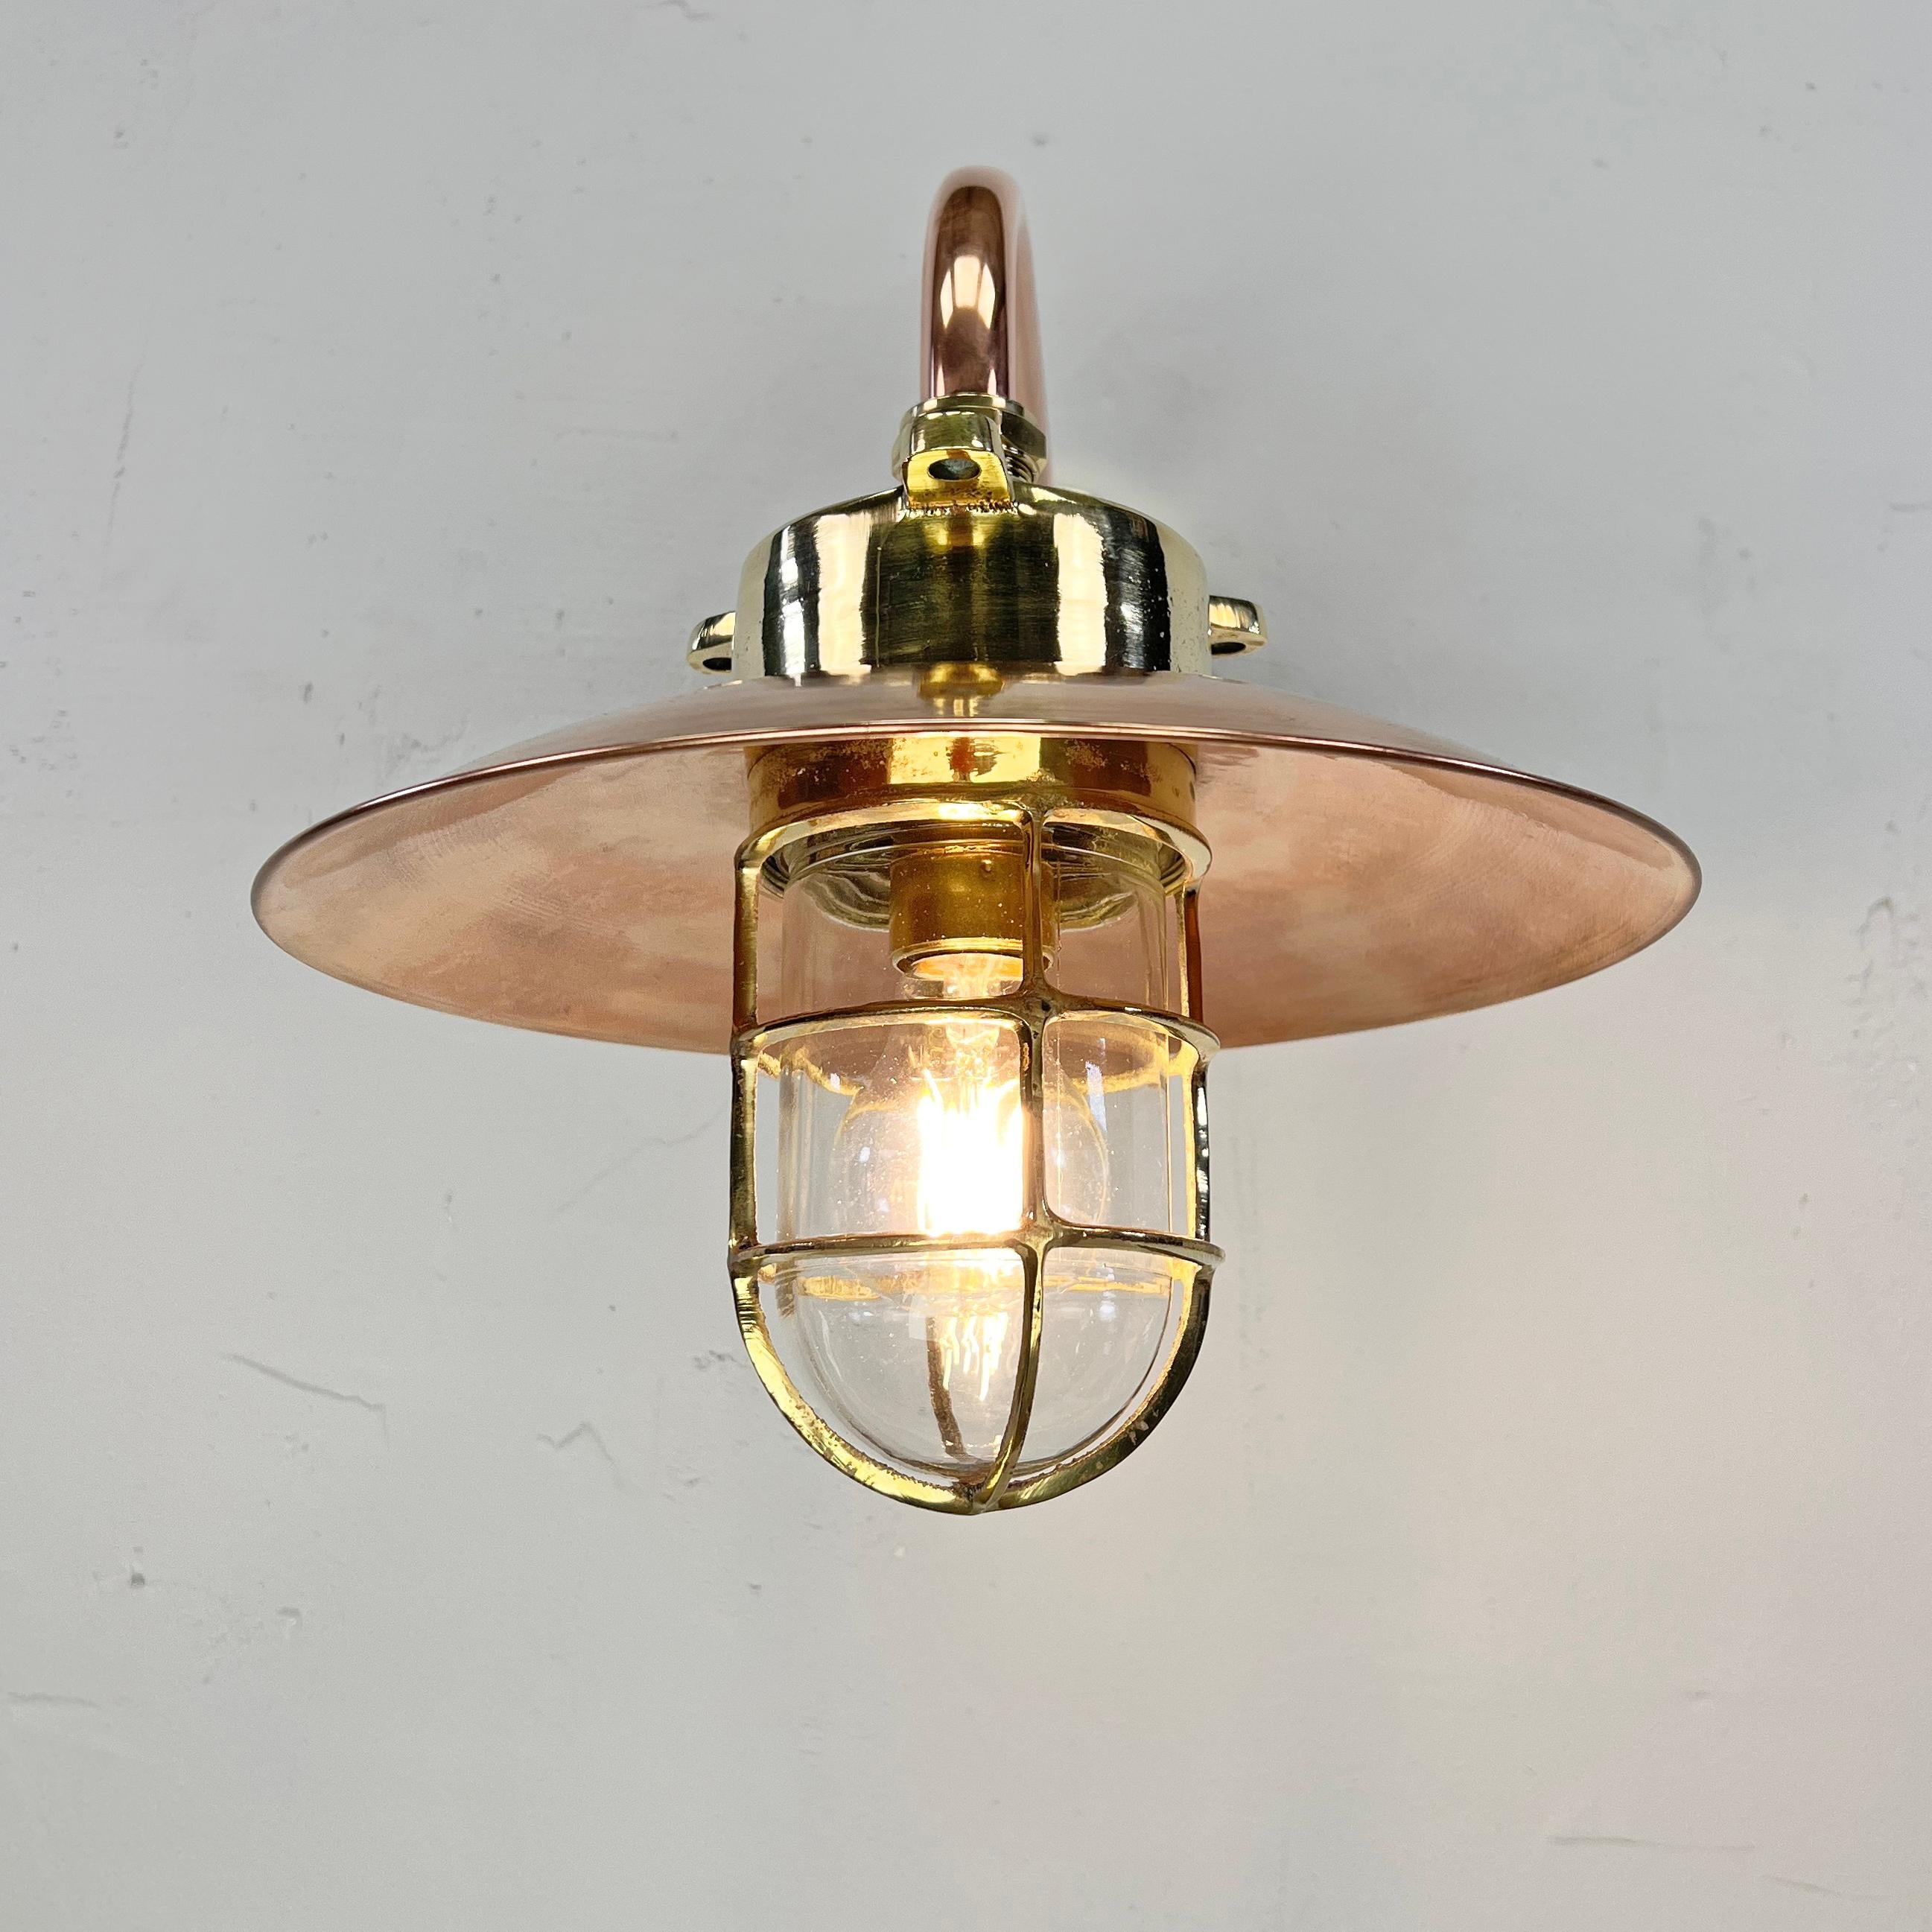 1970s Japanese Cast Brass and Copper Explosion Proof Caged Cantilever Wall Light For Sale 9